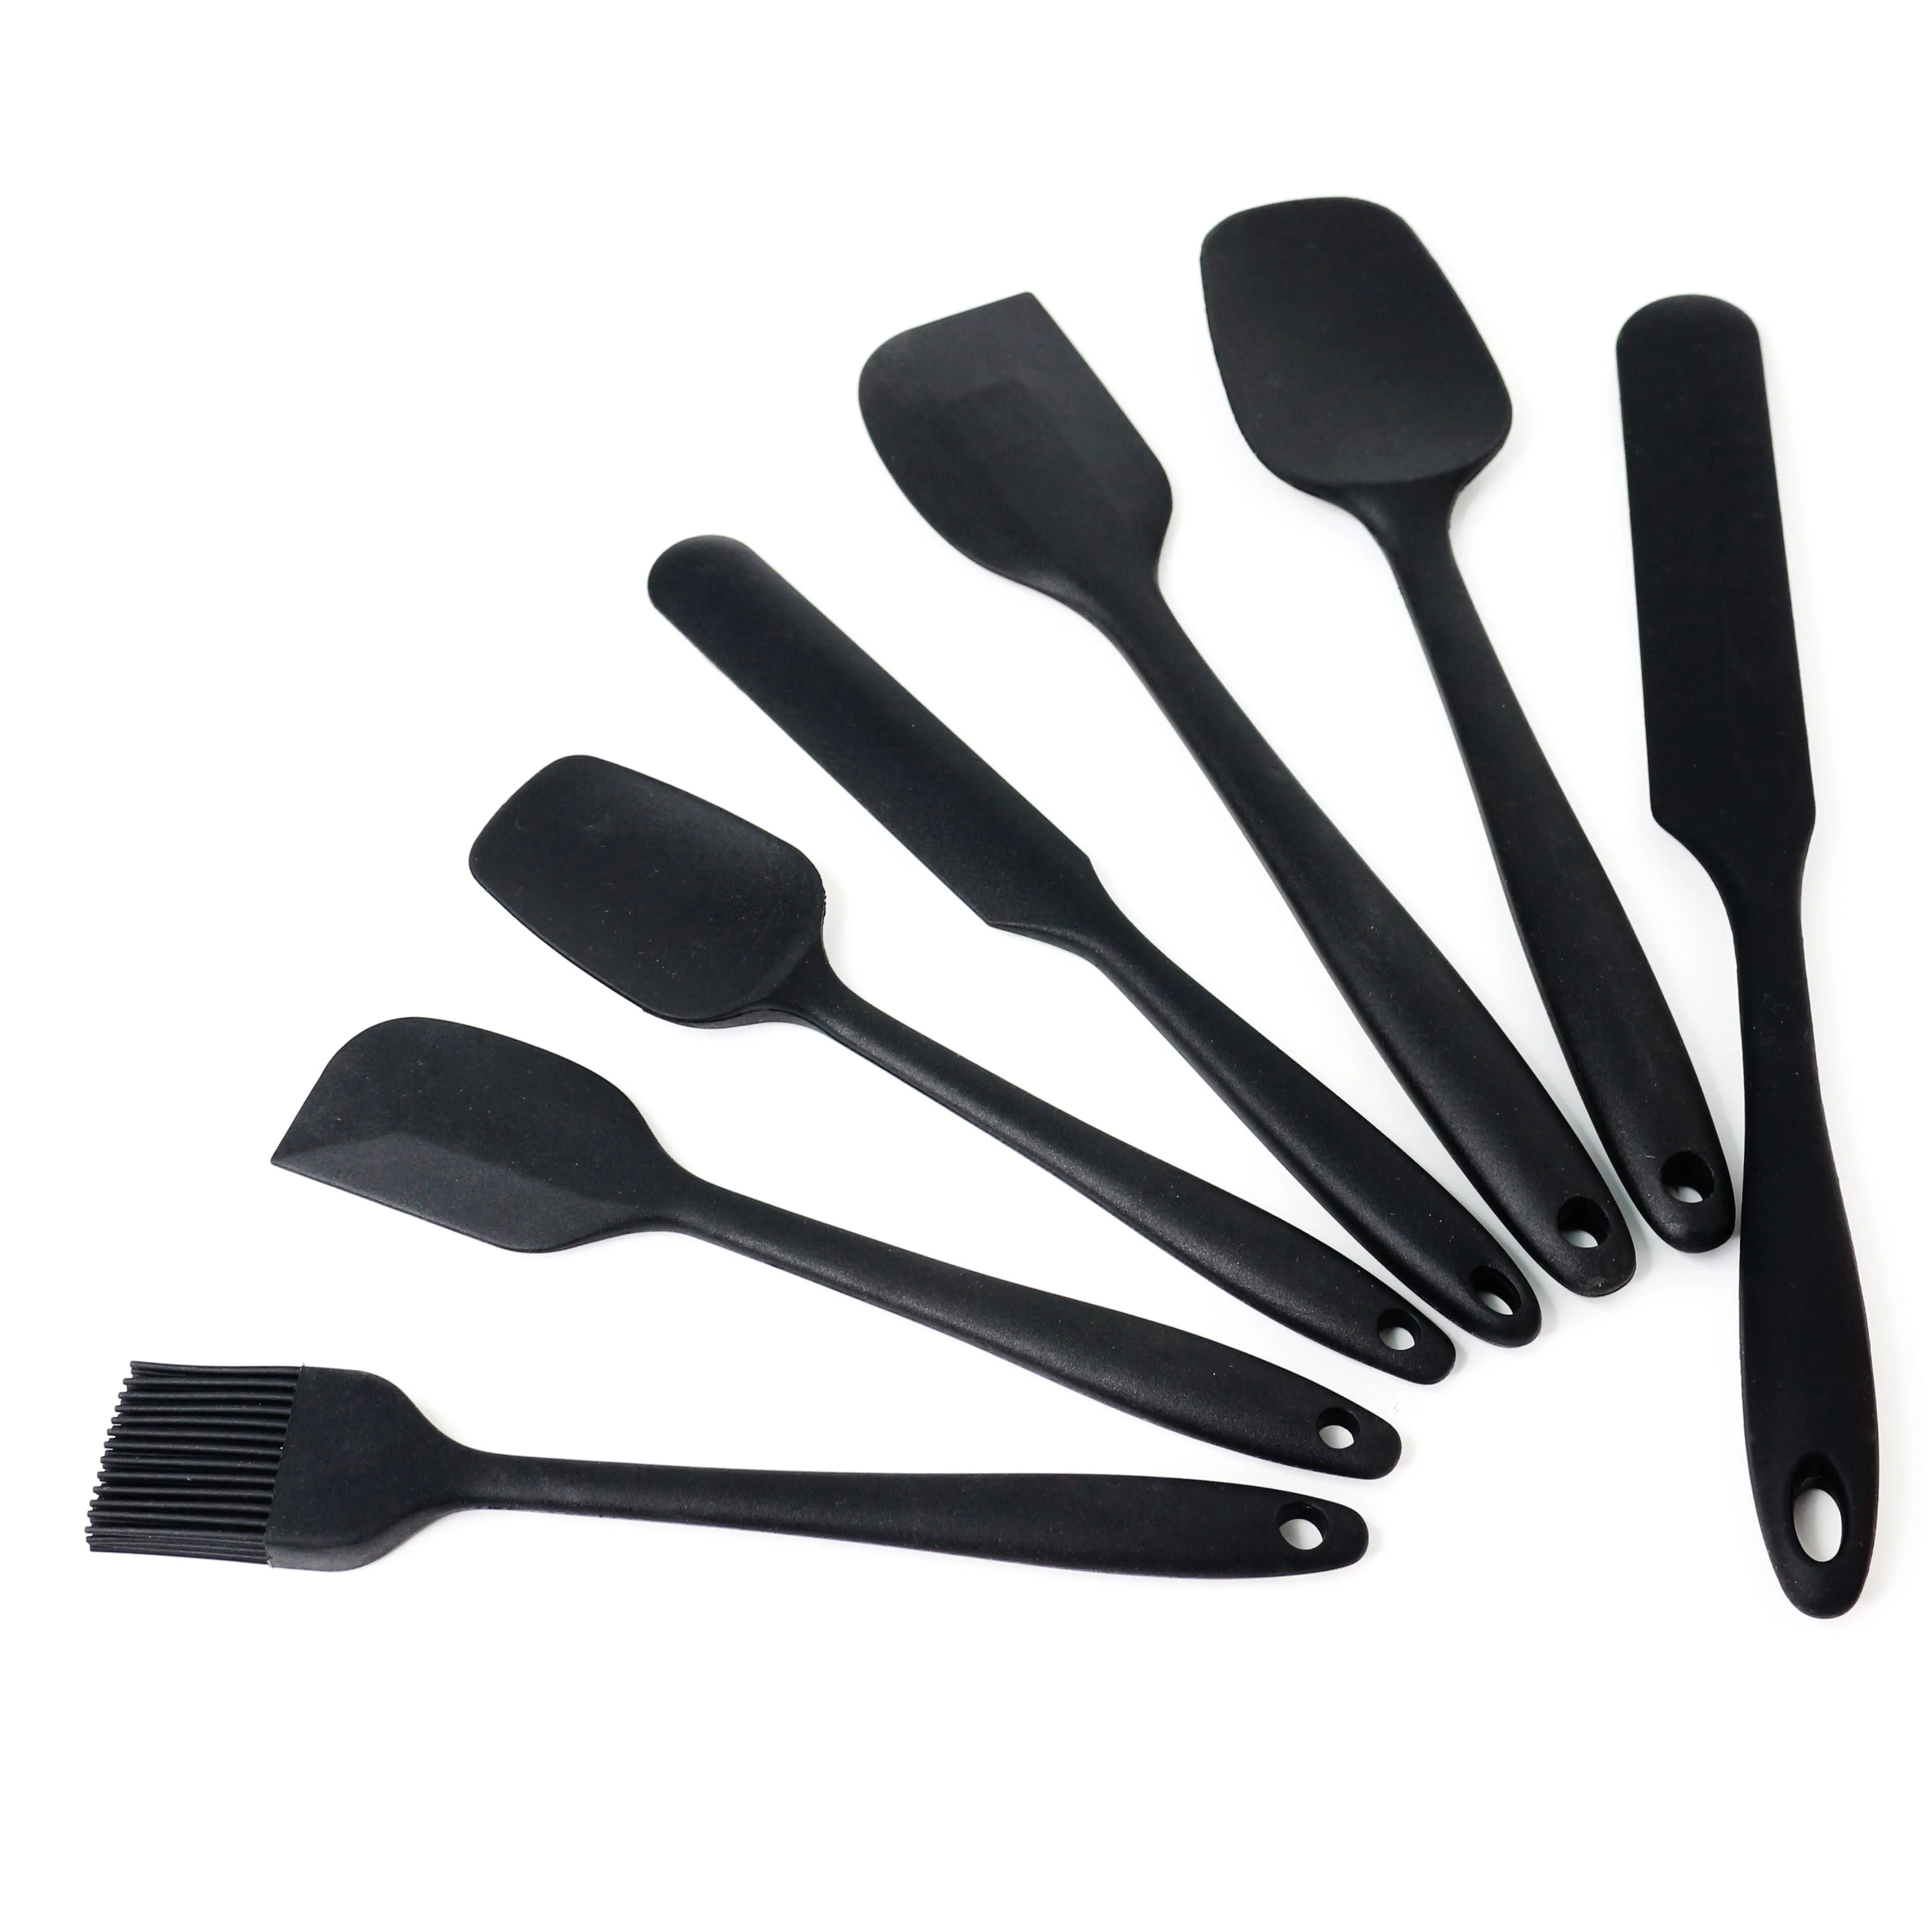 

Kitchen Accessories Heat Resistant 7 Pieces Silicone Baking Cooking BBQ Spatula and Brush Utensils Set Spatula Silicone, Black, red or other